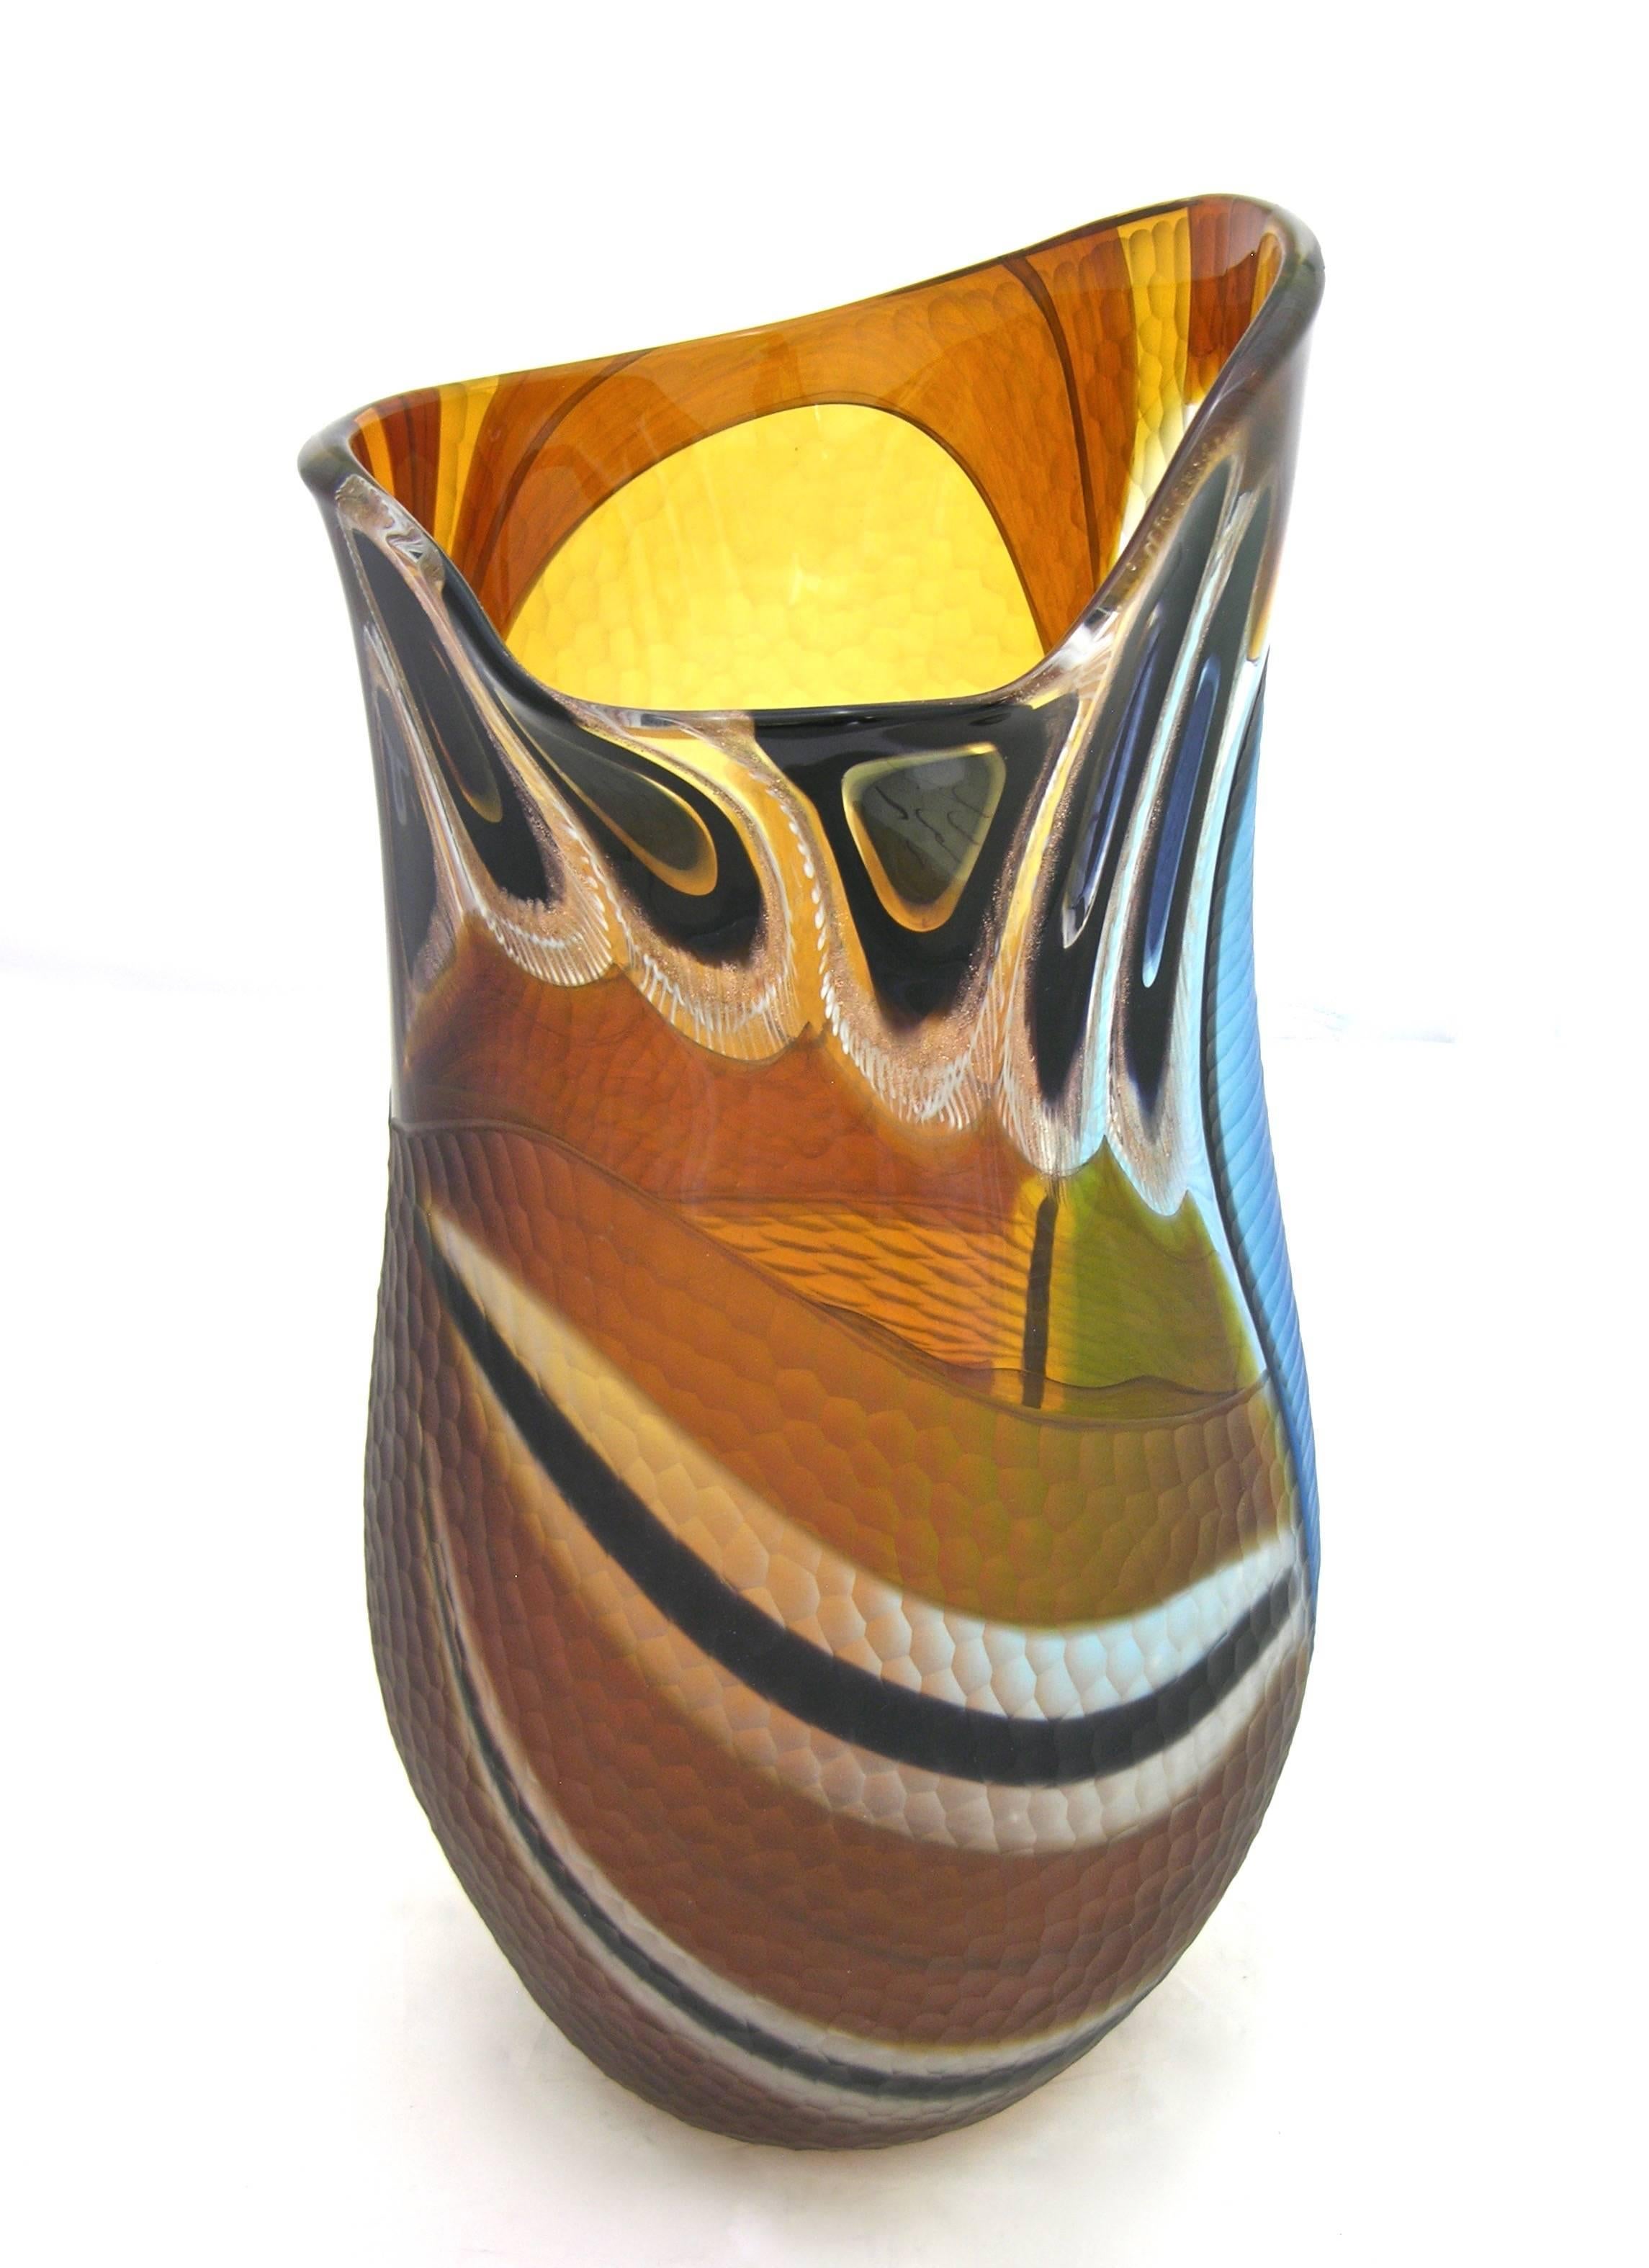 Blown Glass Cenedese 1990s Colorful Murano Glass Vase with Blue Black and Gold Murrine